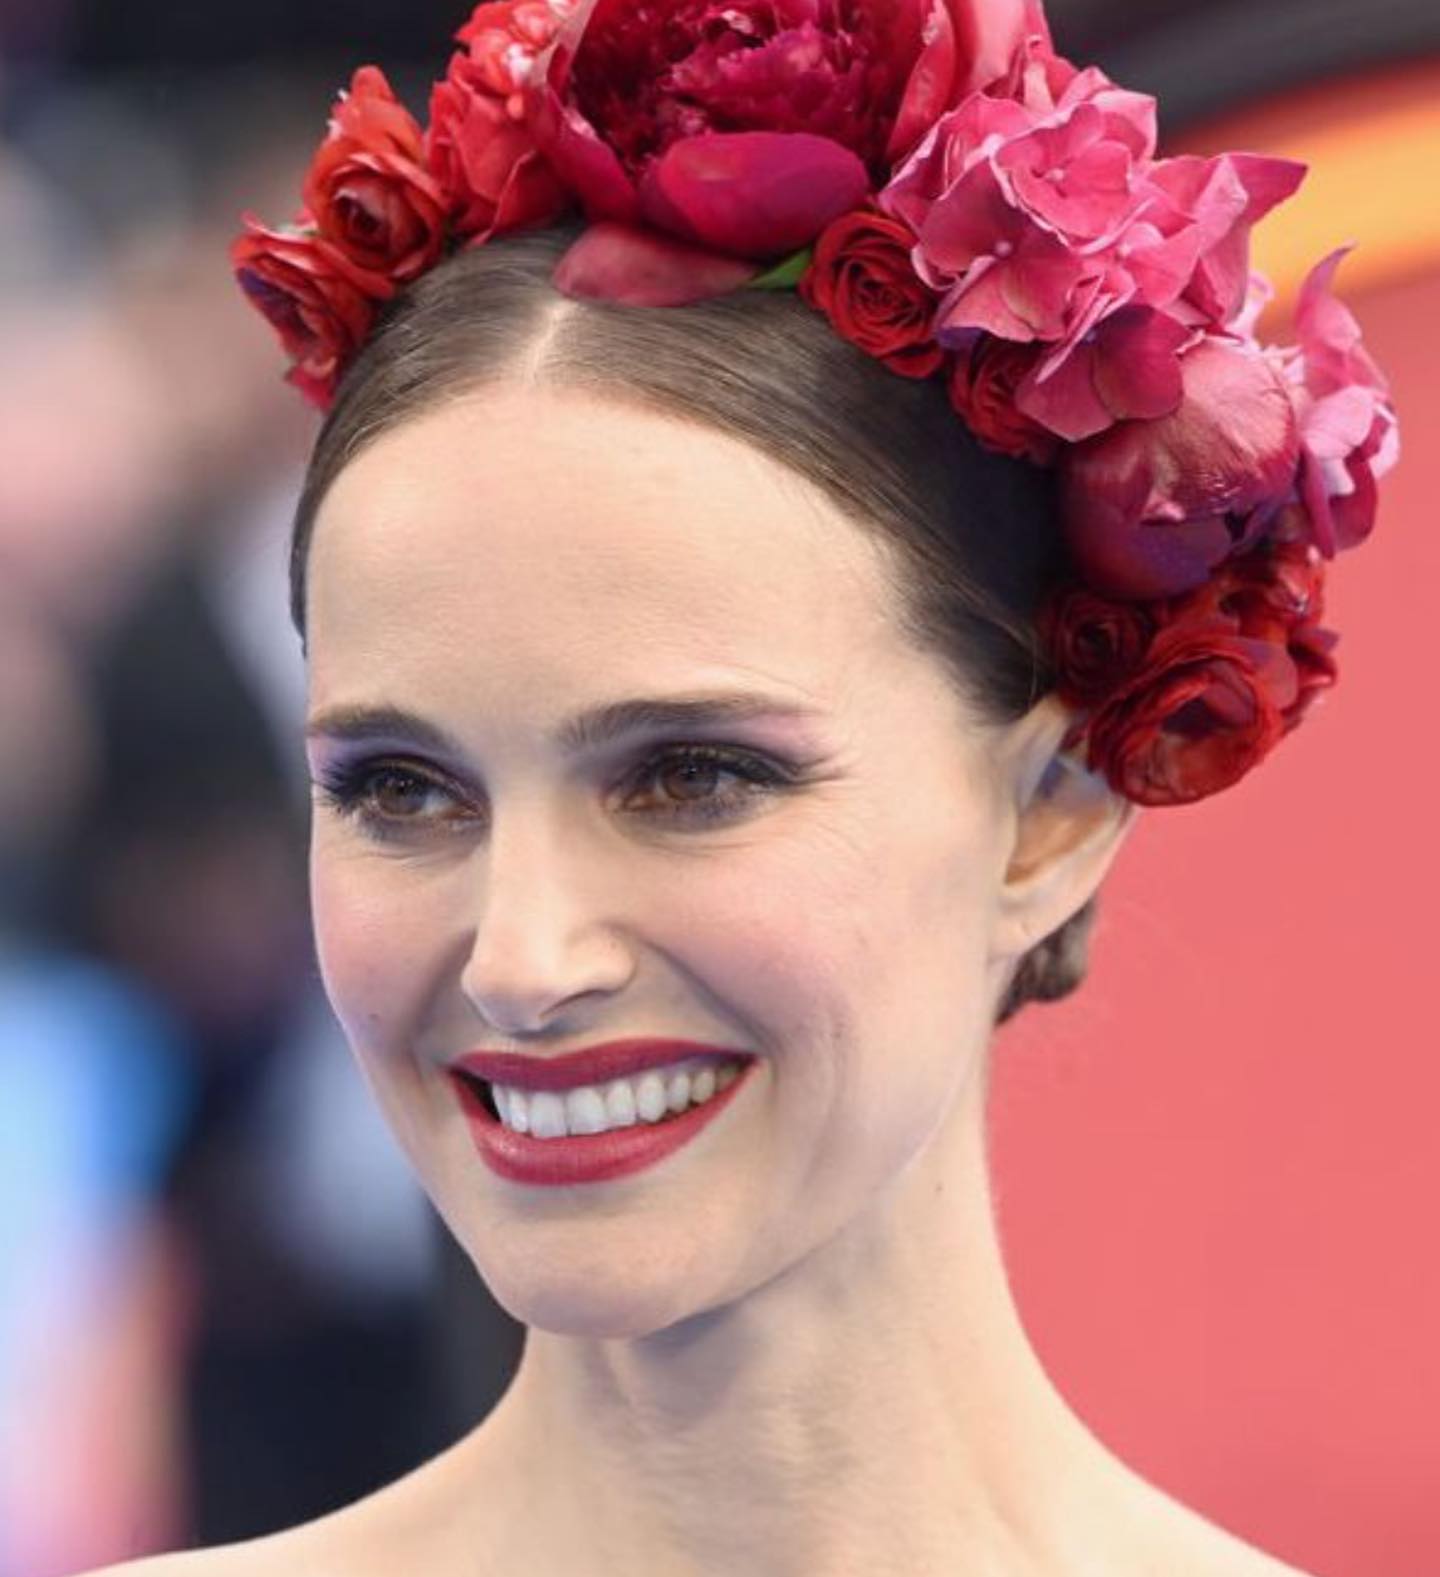 What do Natalie Portman’s arms imply about contemporary femininity?